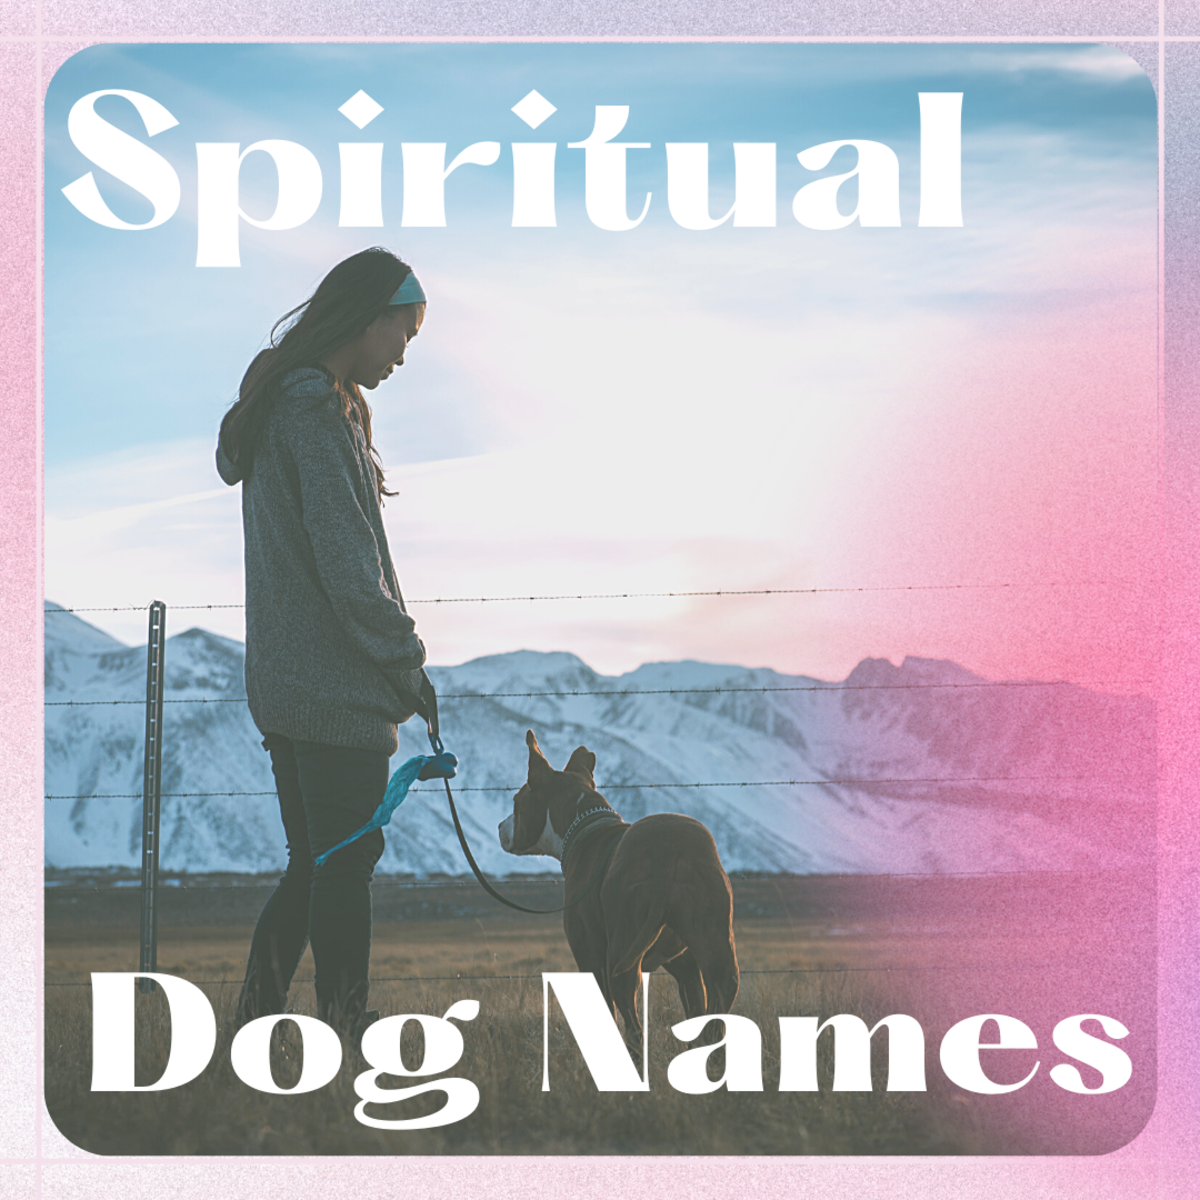 Discover some meaningful names for your dog inspired by spirituality and mysticism.